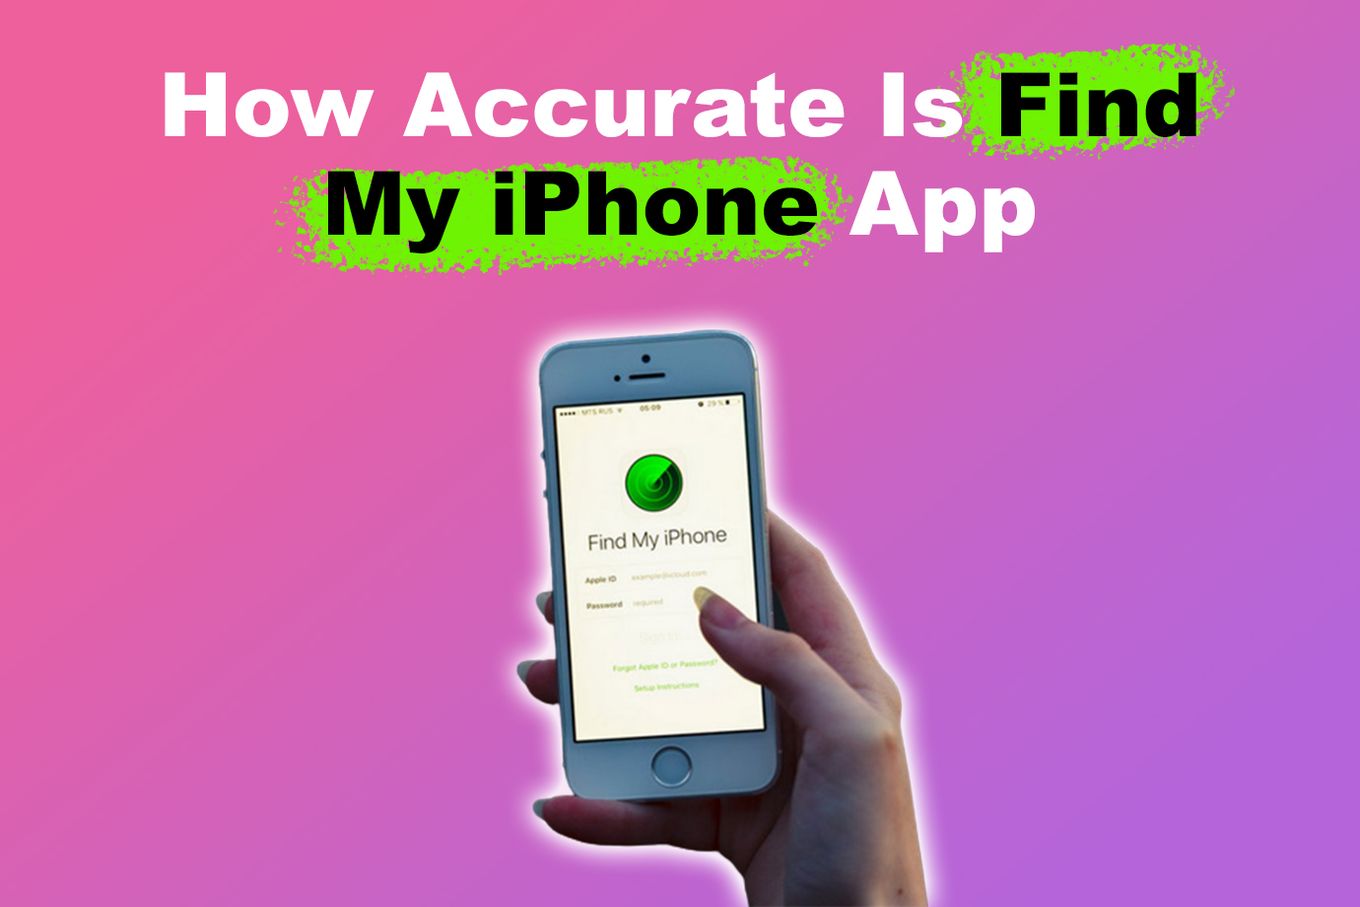 How Accurate Is Find My iPhone App